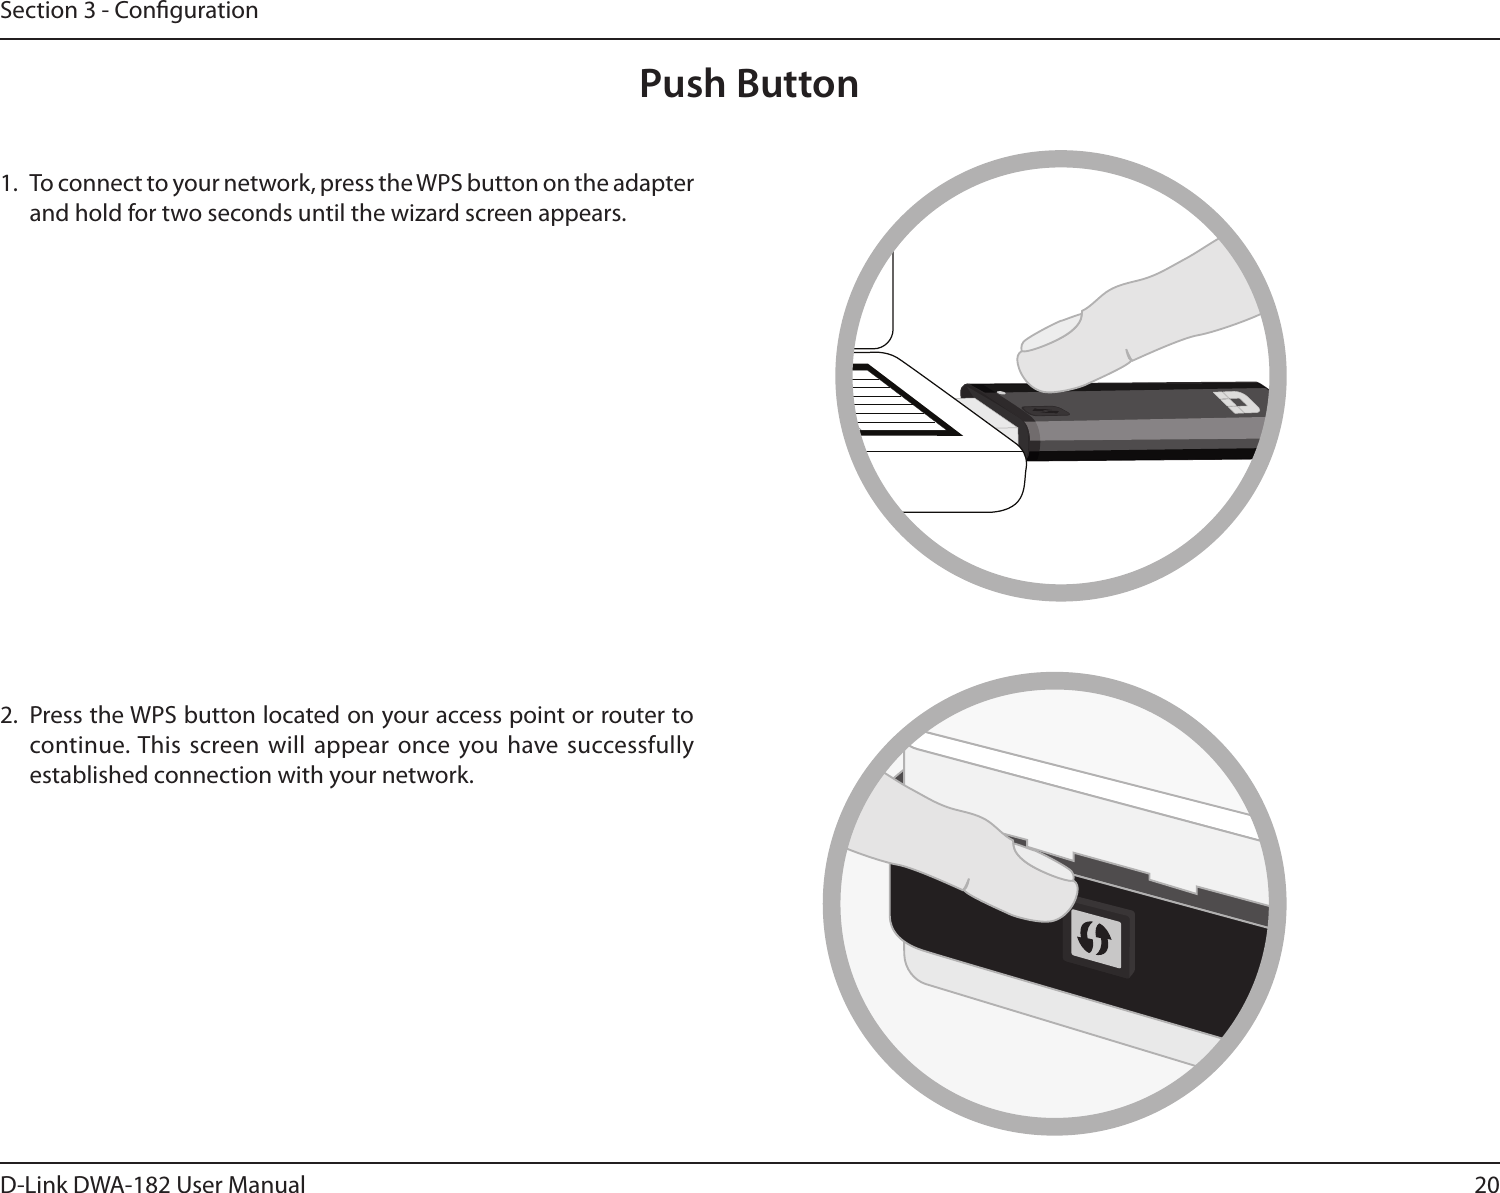 20D-Link DWA-182 User ManualSection 3 - CongurationPush Button1.  To connect to your network, press the WPS button on the adapter and hold for two seconds until the wizard screen appears.2.  Press the WPS button located on your access point or router to continue. This screen will appear once you have successfully established connection with your network. 